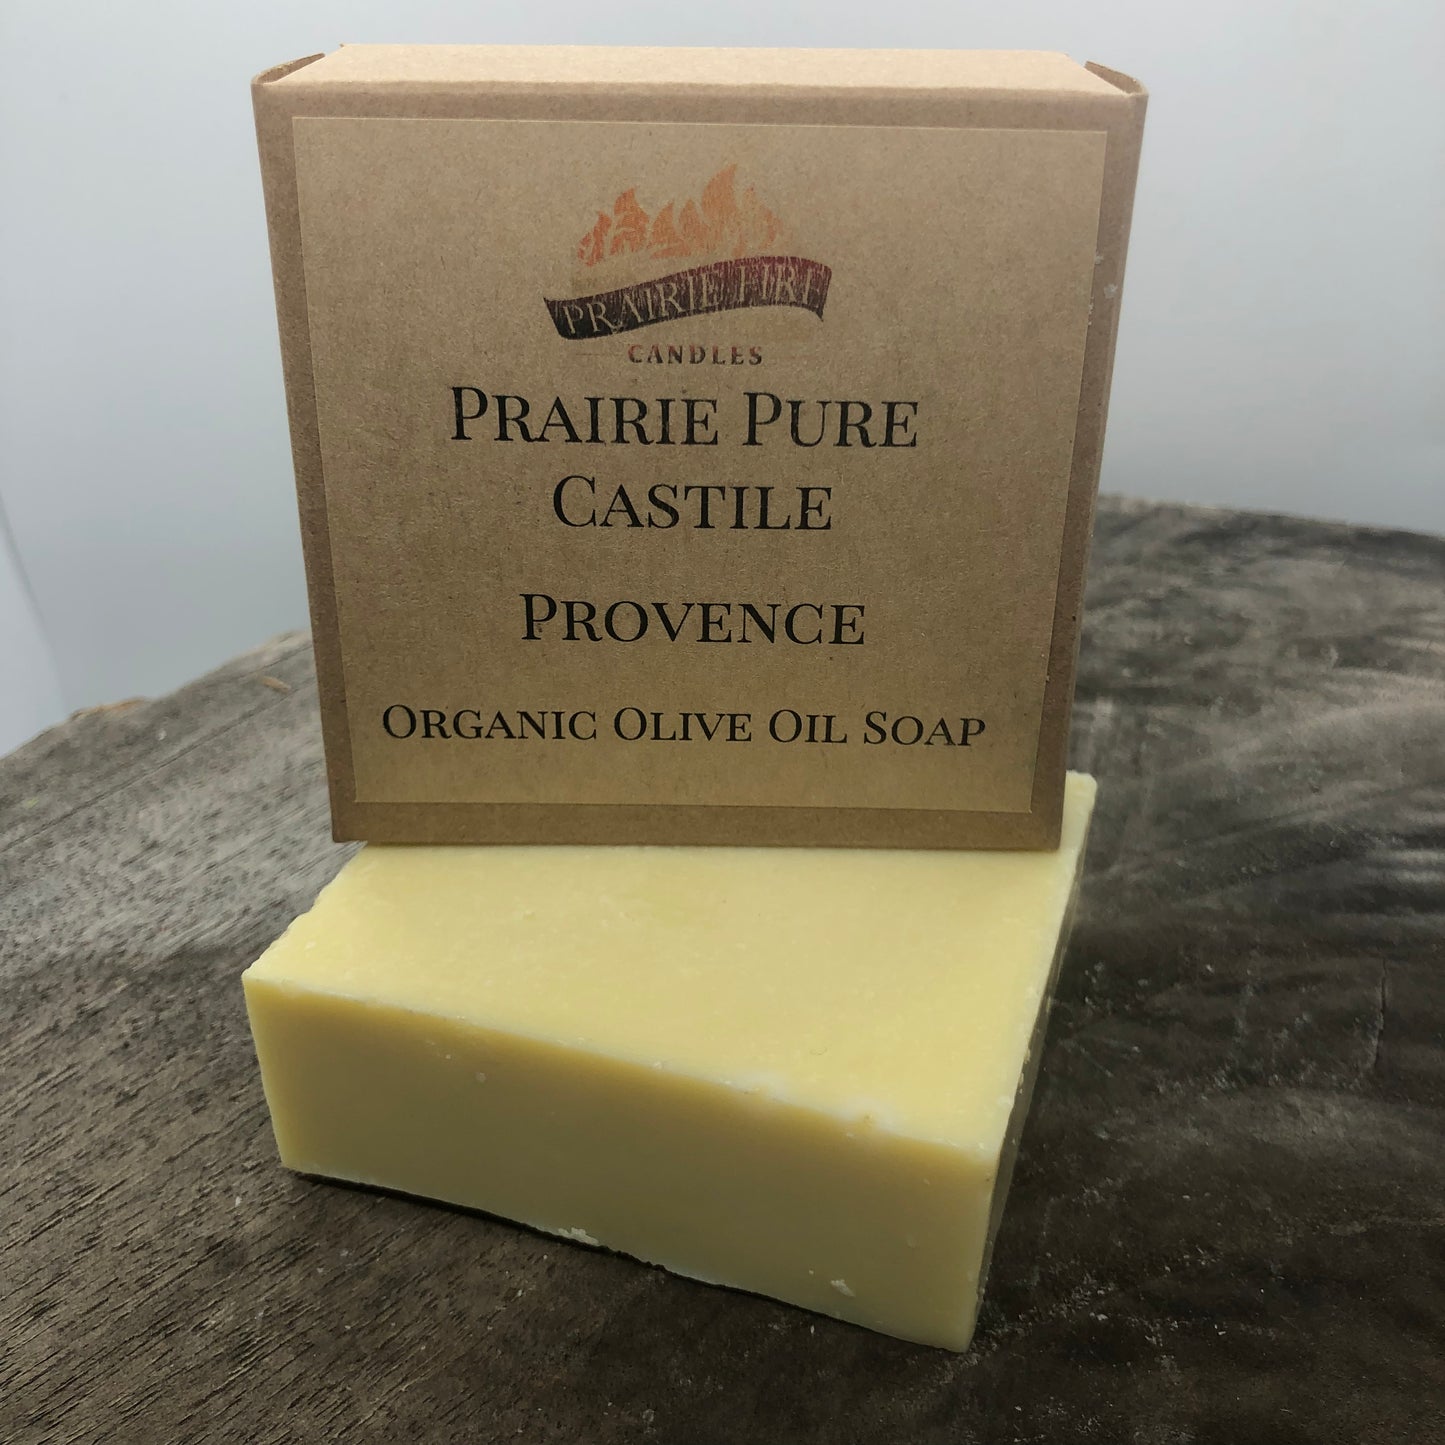 Provence (Lavender) Real Castile Organic Olive Oil Soap for Sensitive Skin - Dye Free - 100% Certified Organic Extra Virgin Olive Oil - Prairie Fire Candles